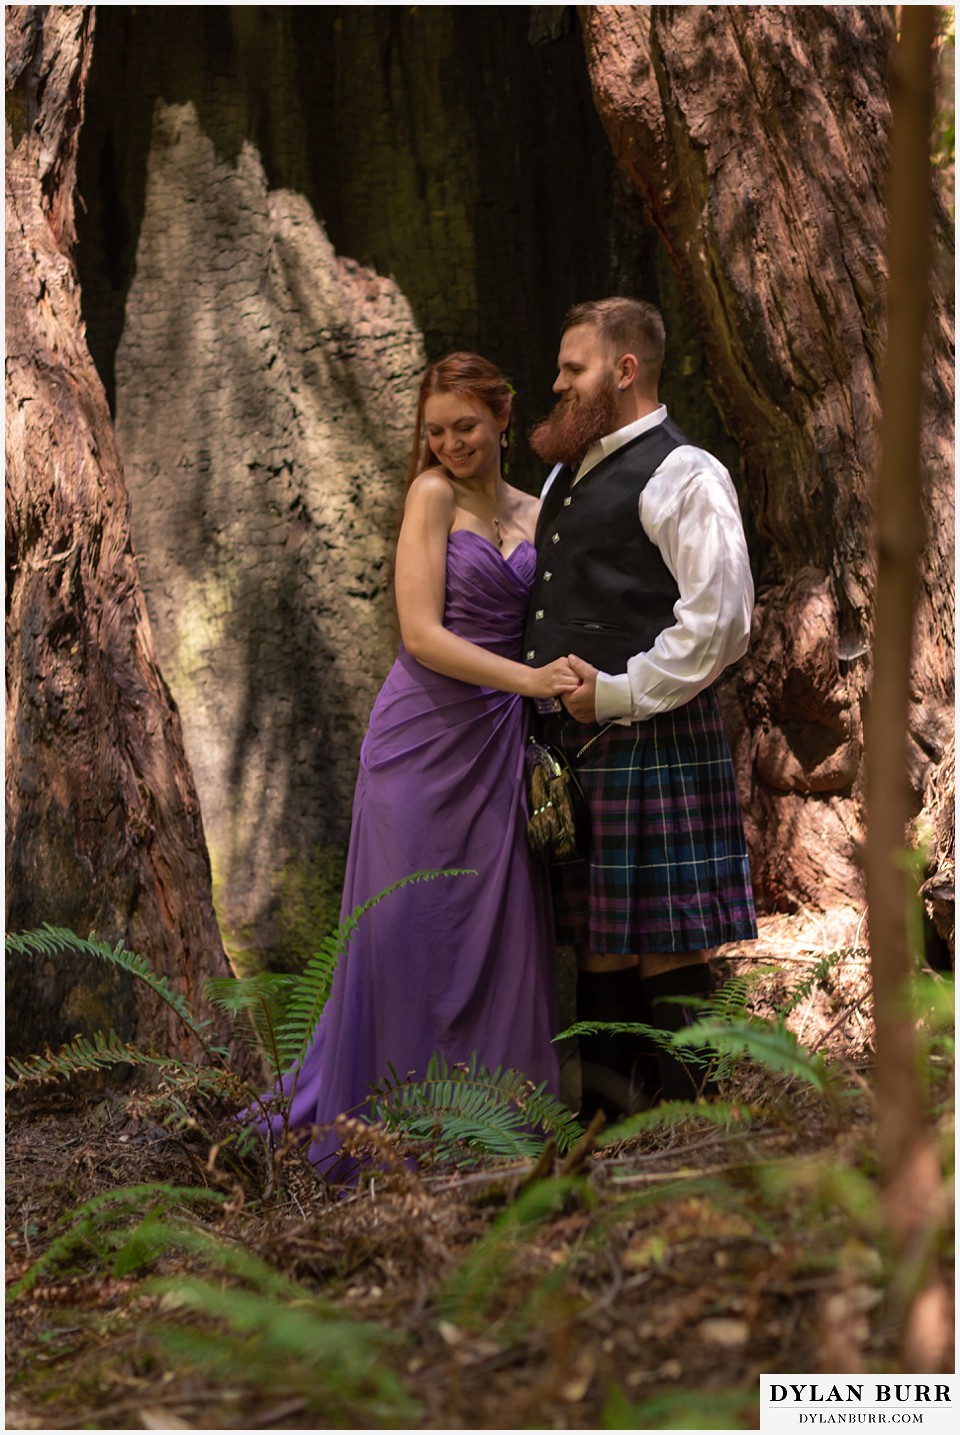 redwood forest wedding elopement avenue of the giants california cute maid of honor and scottish best man together